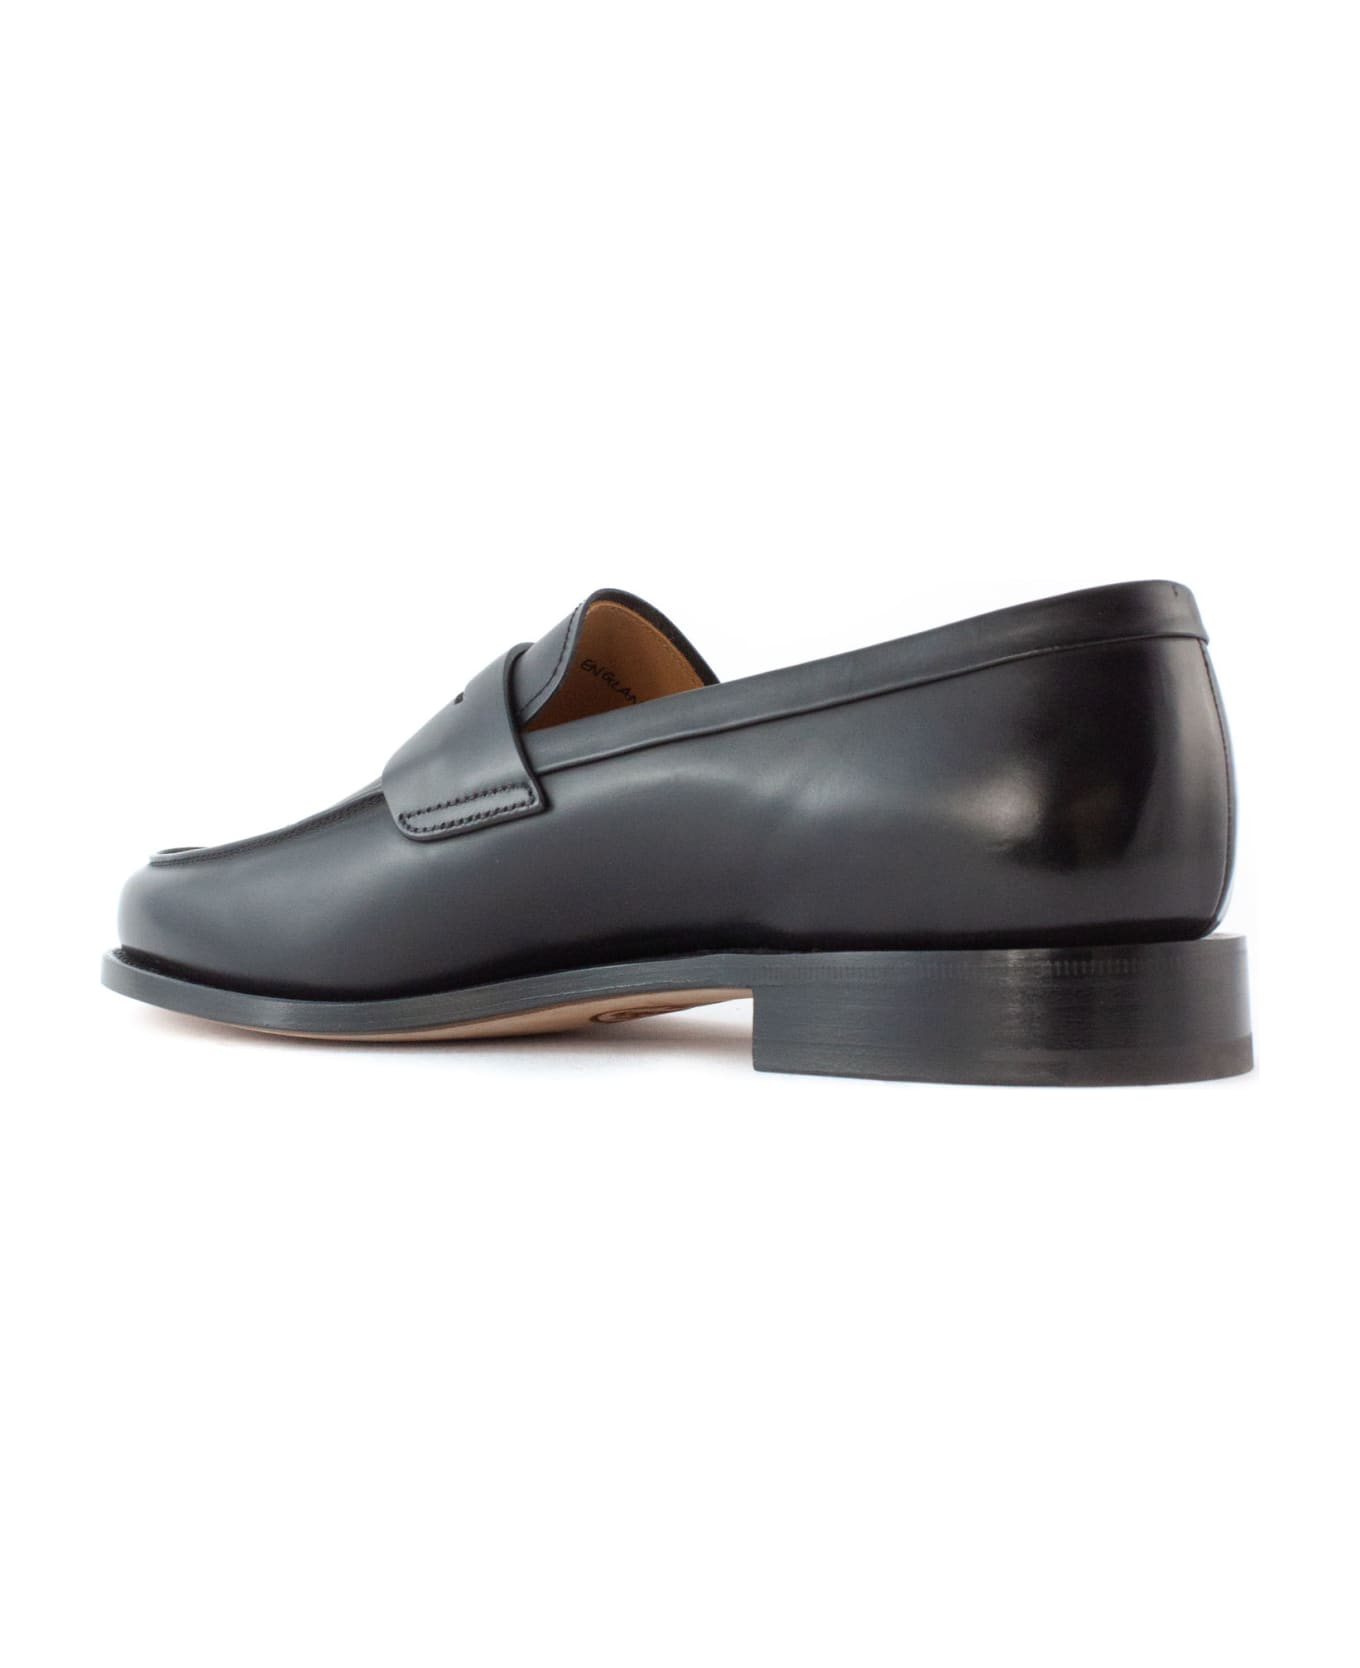 Church's Loafer In Black Leather - Black ローファー＆デッキシューズ